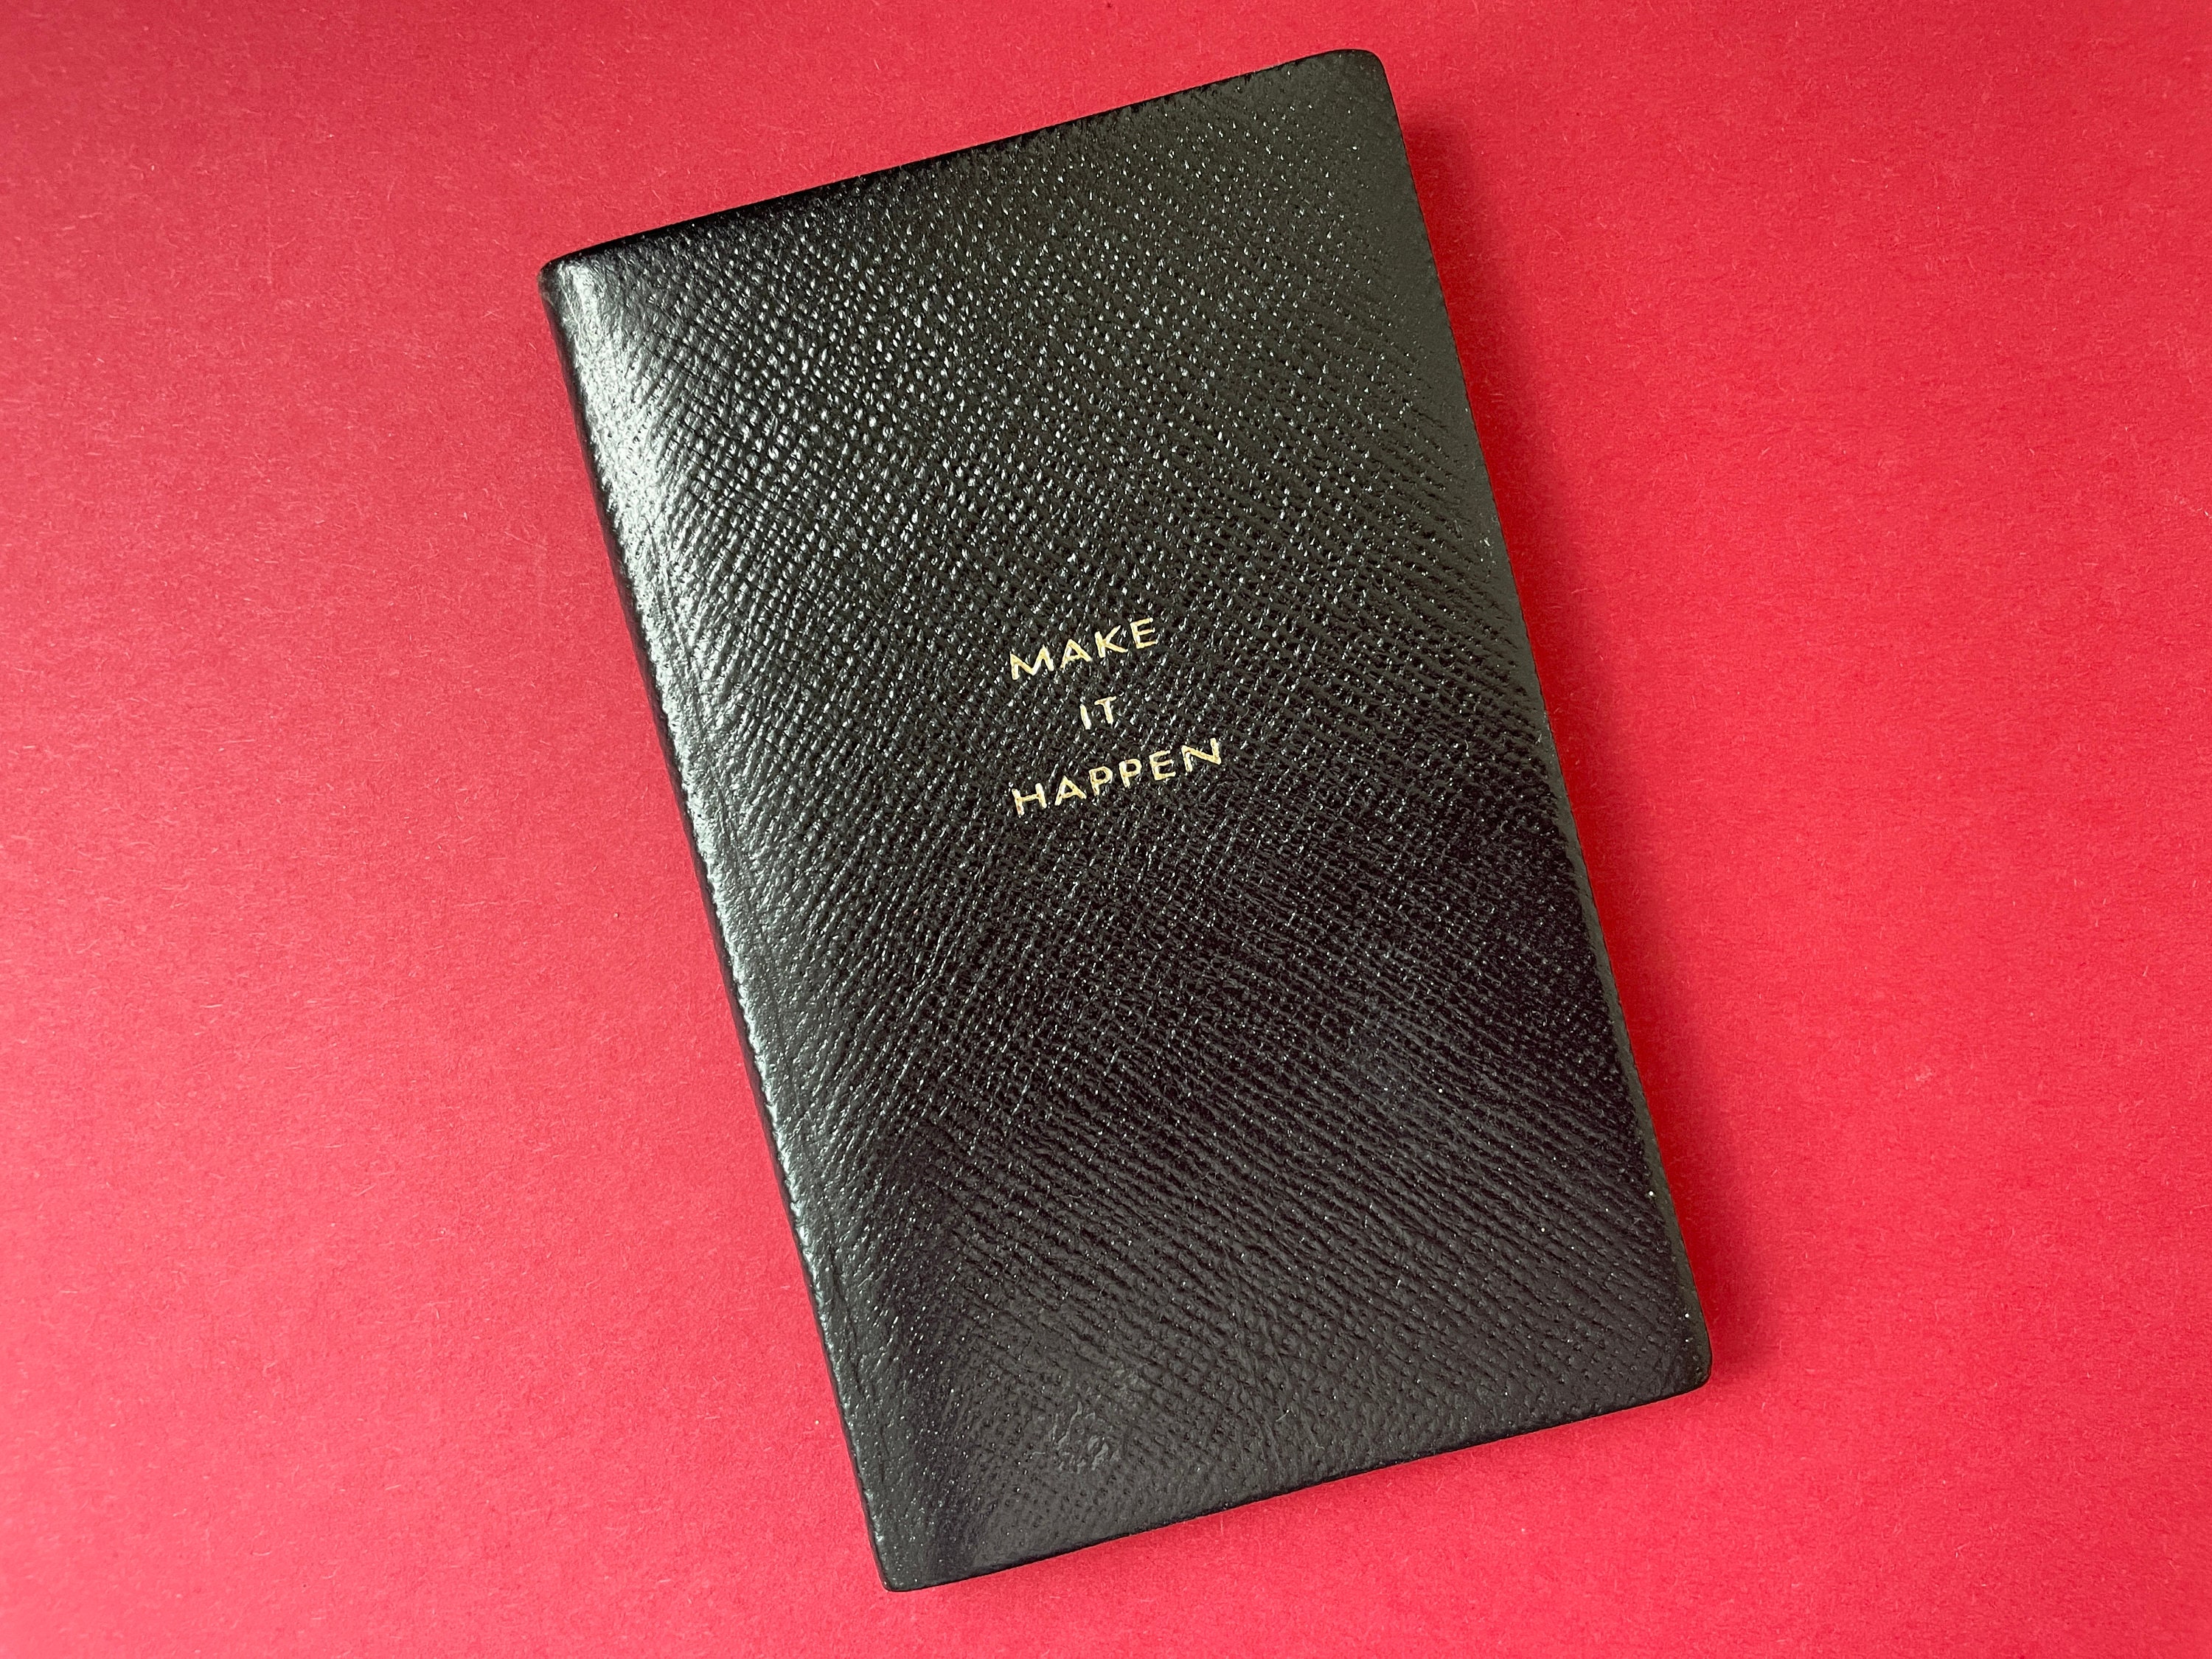 Smythson leather British Luxury diary - gift ideas - Hardbound book  BRUNCHES LUNCHES SUPPERS DINNERS 